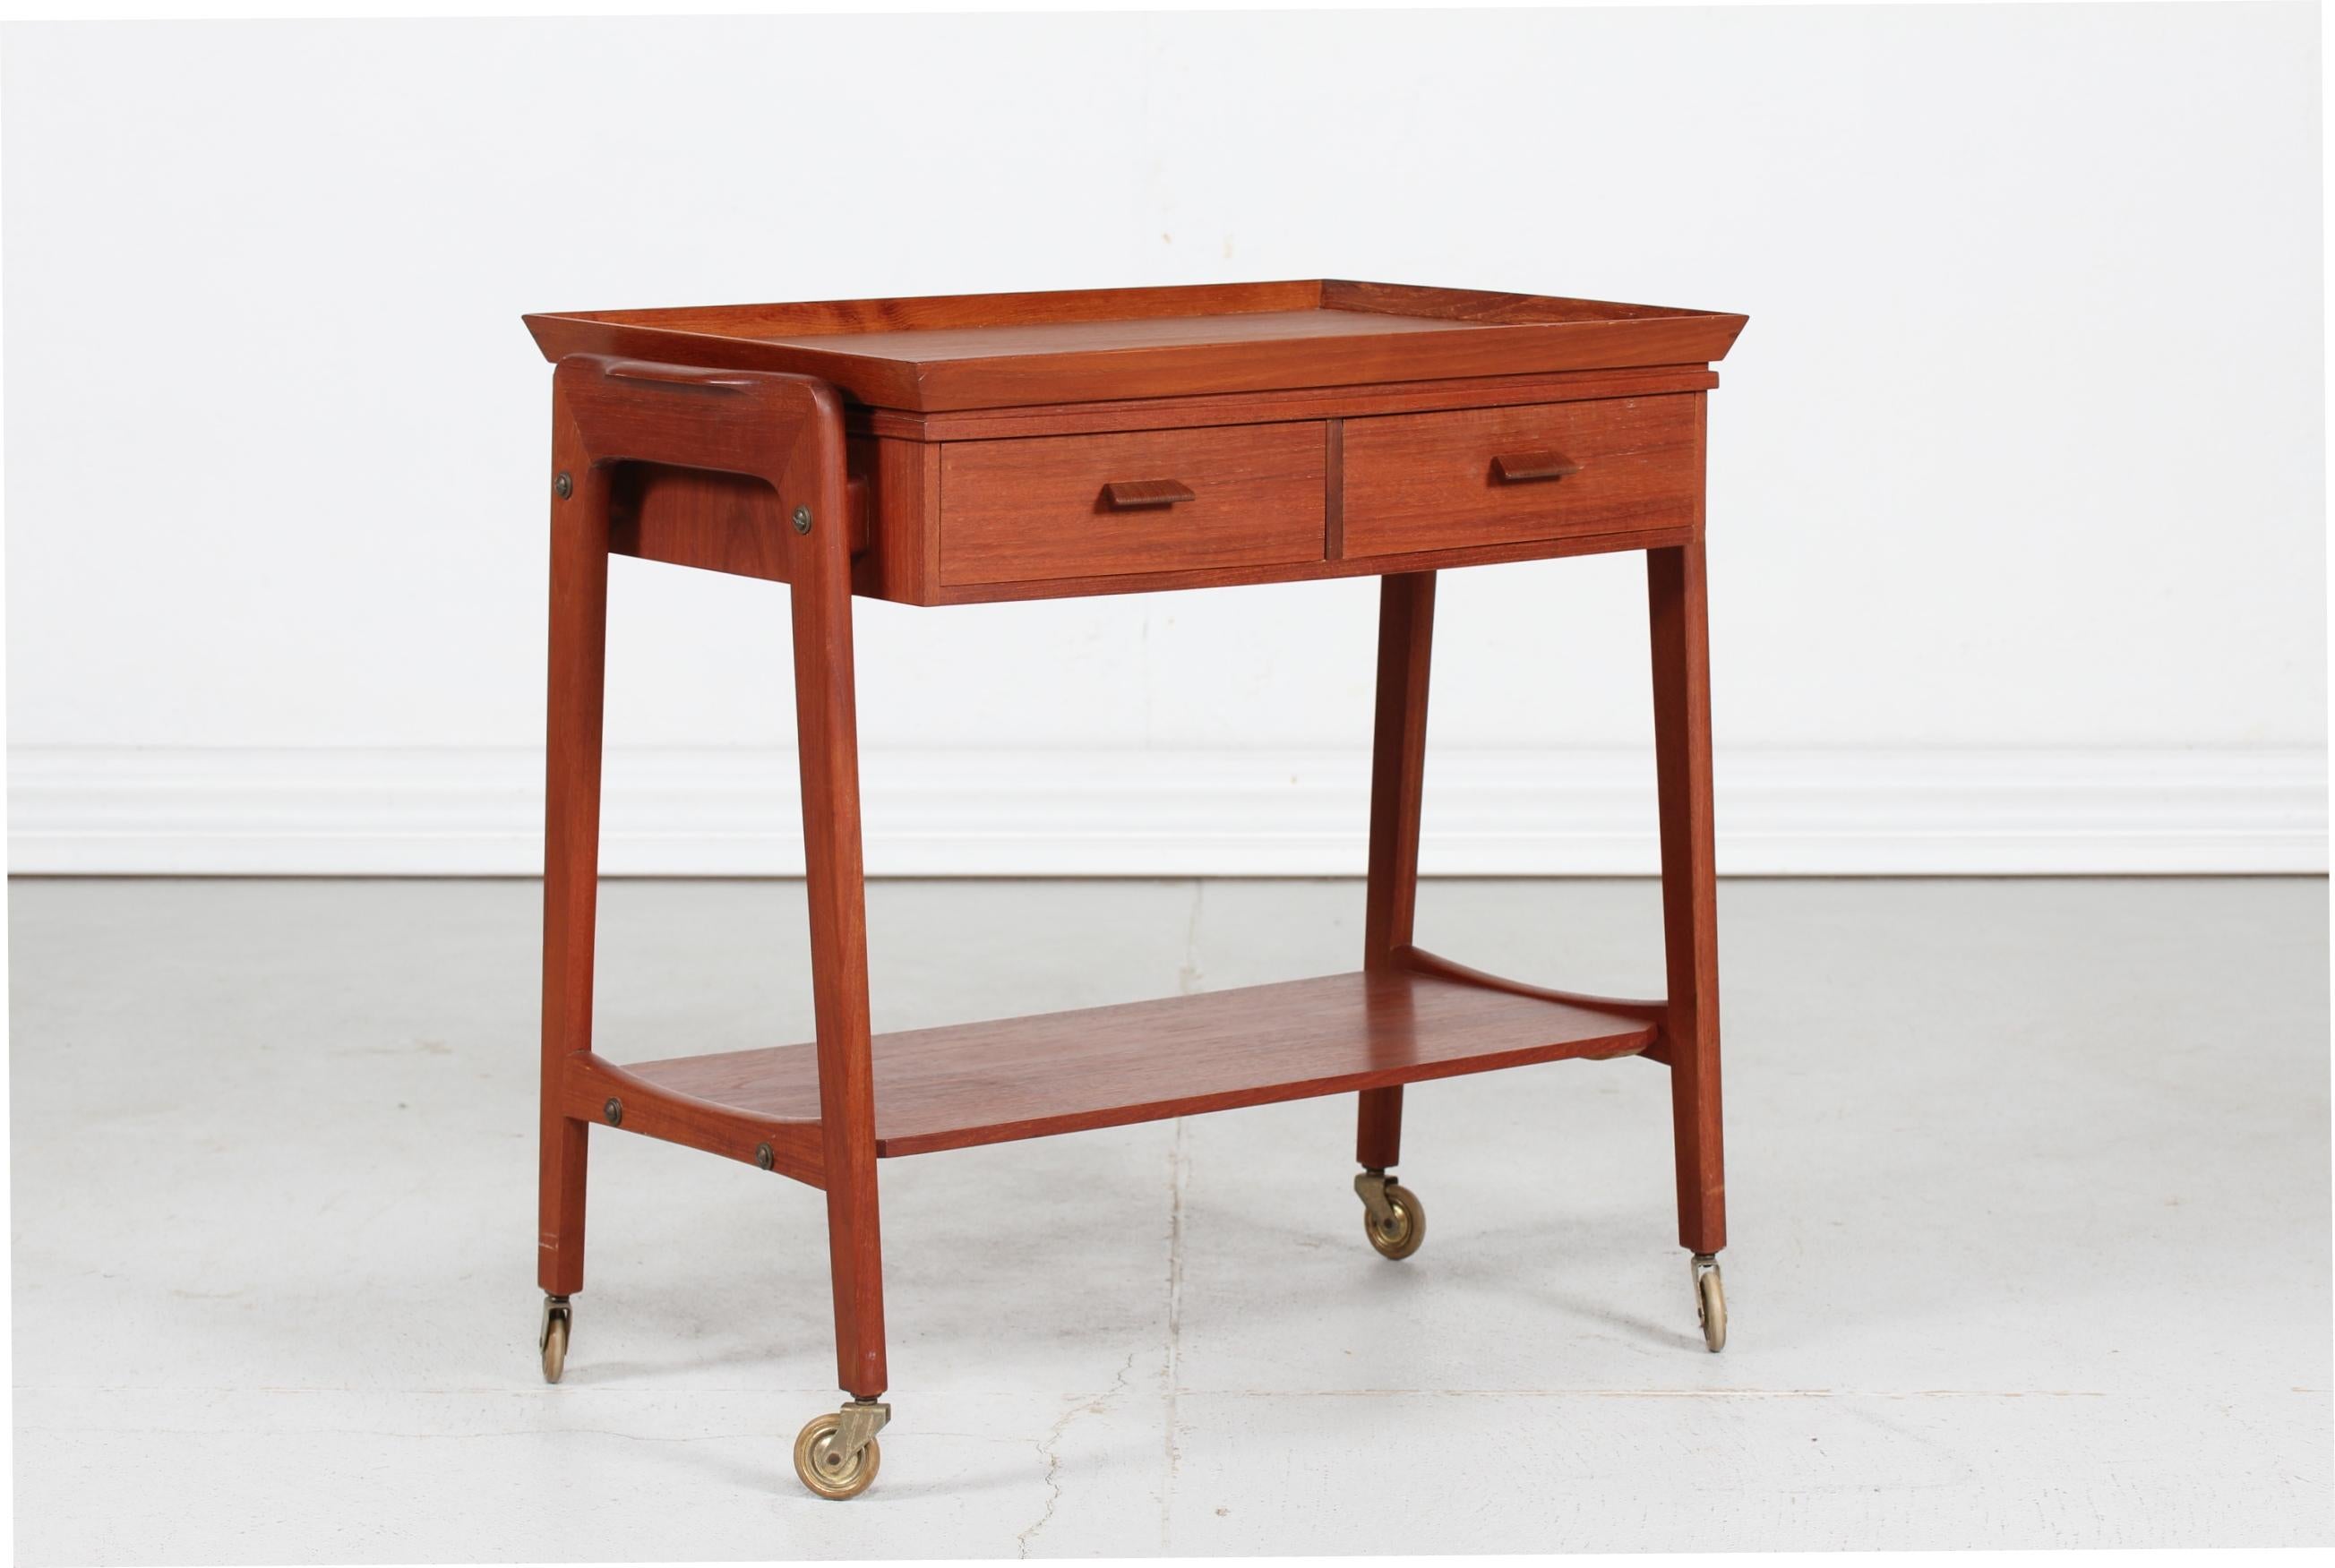 Danish modern cocktail- or serving trolley with removable butler´s tray made of teak and designed by a danish architect in the 1960s
The trolley has two drawers with dovetail joints and a bottom shelf.

Very nice vintage condition, ready for